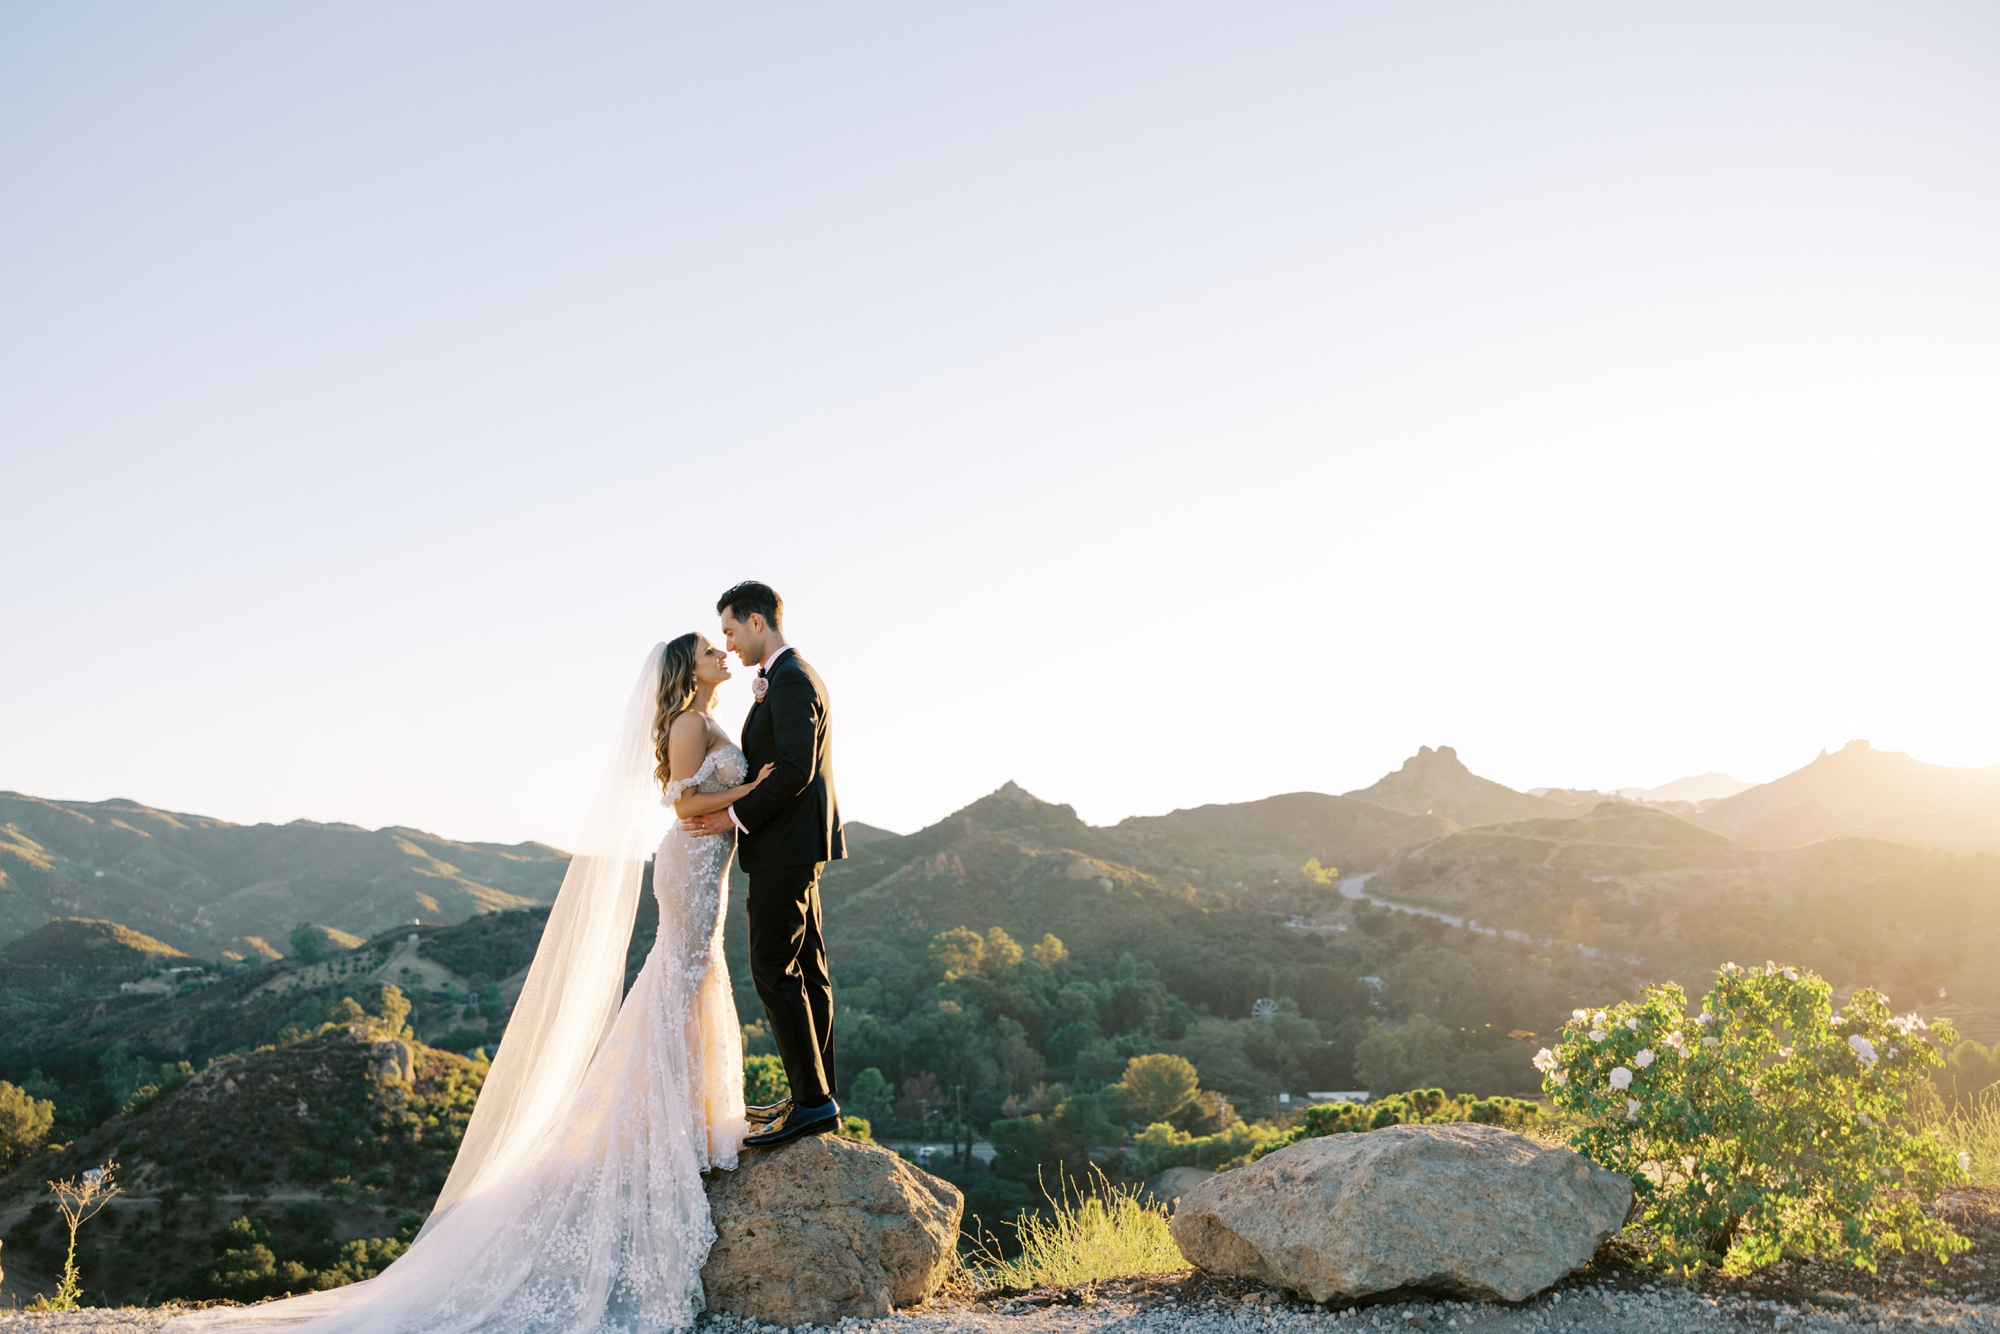 South Coast Winery Styled Shoot Temecula — Champagne Dreams + Co.